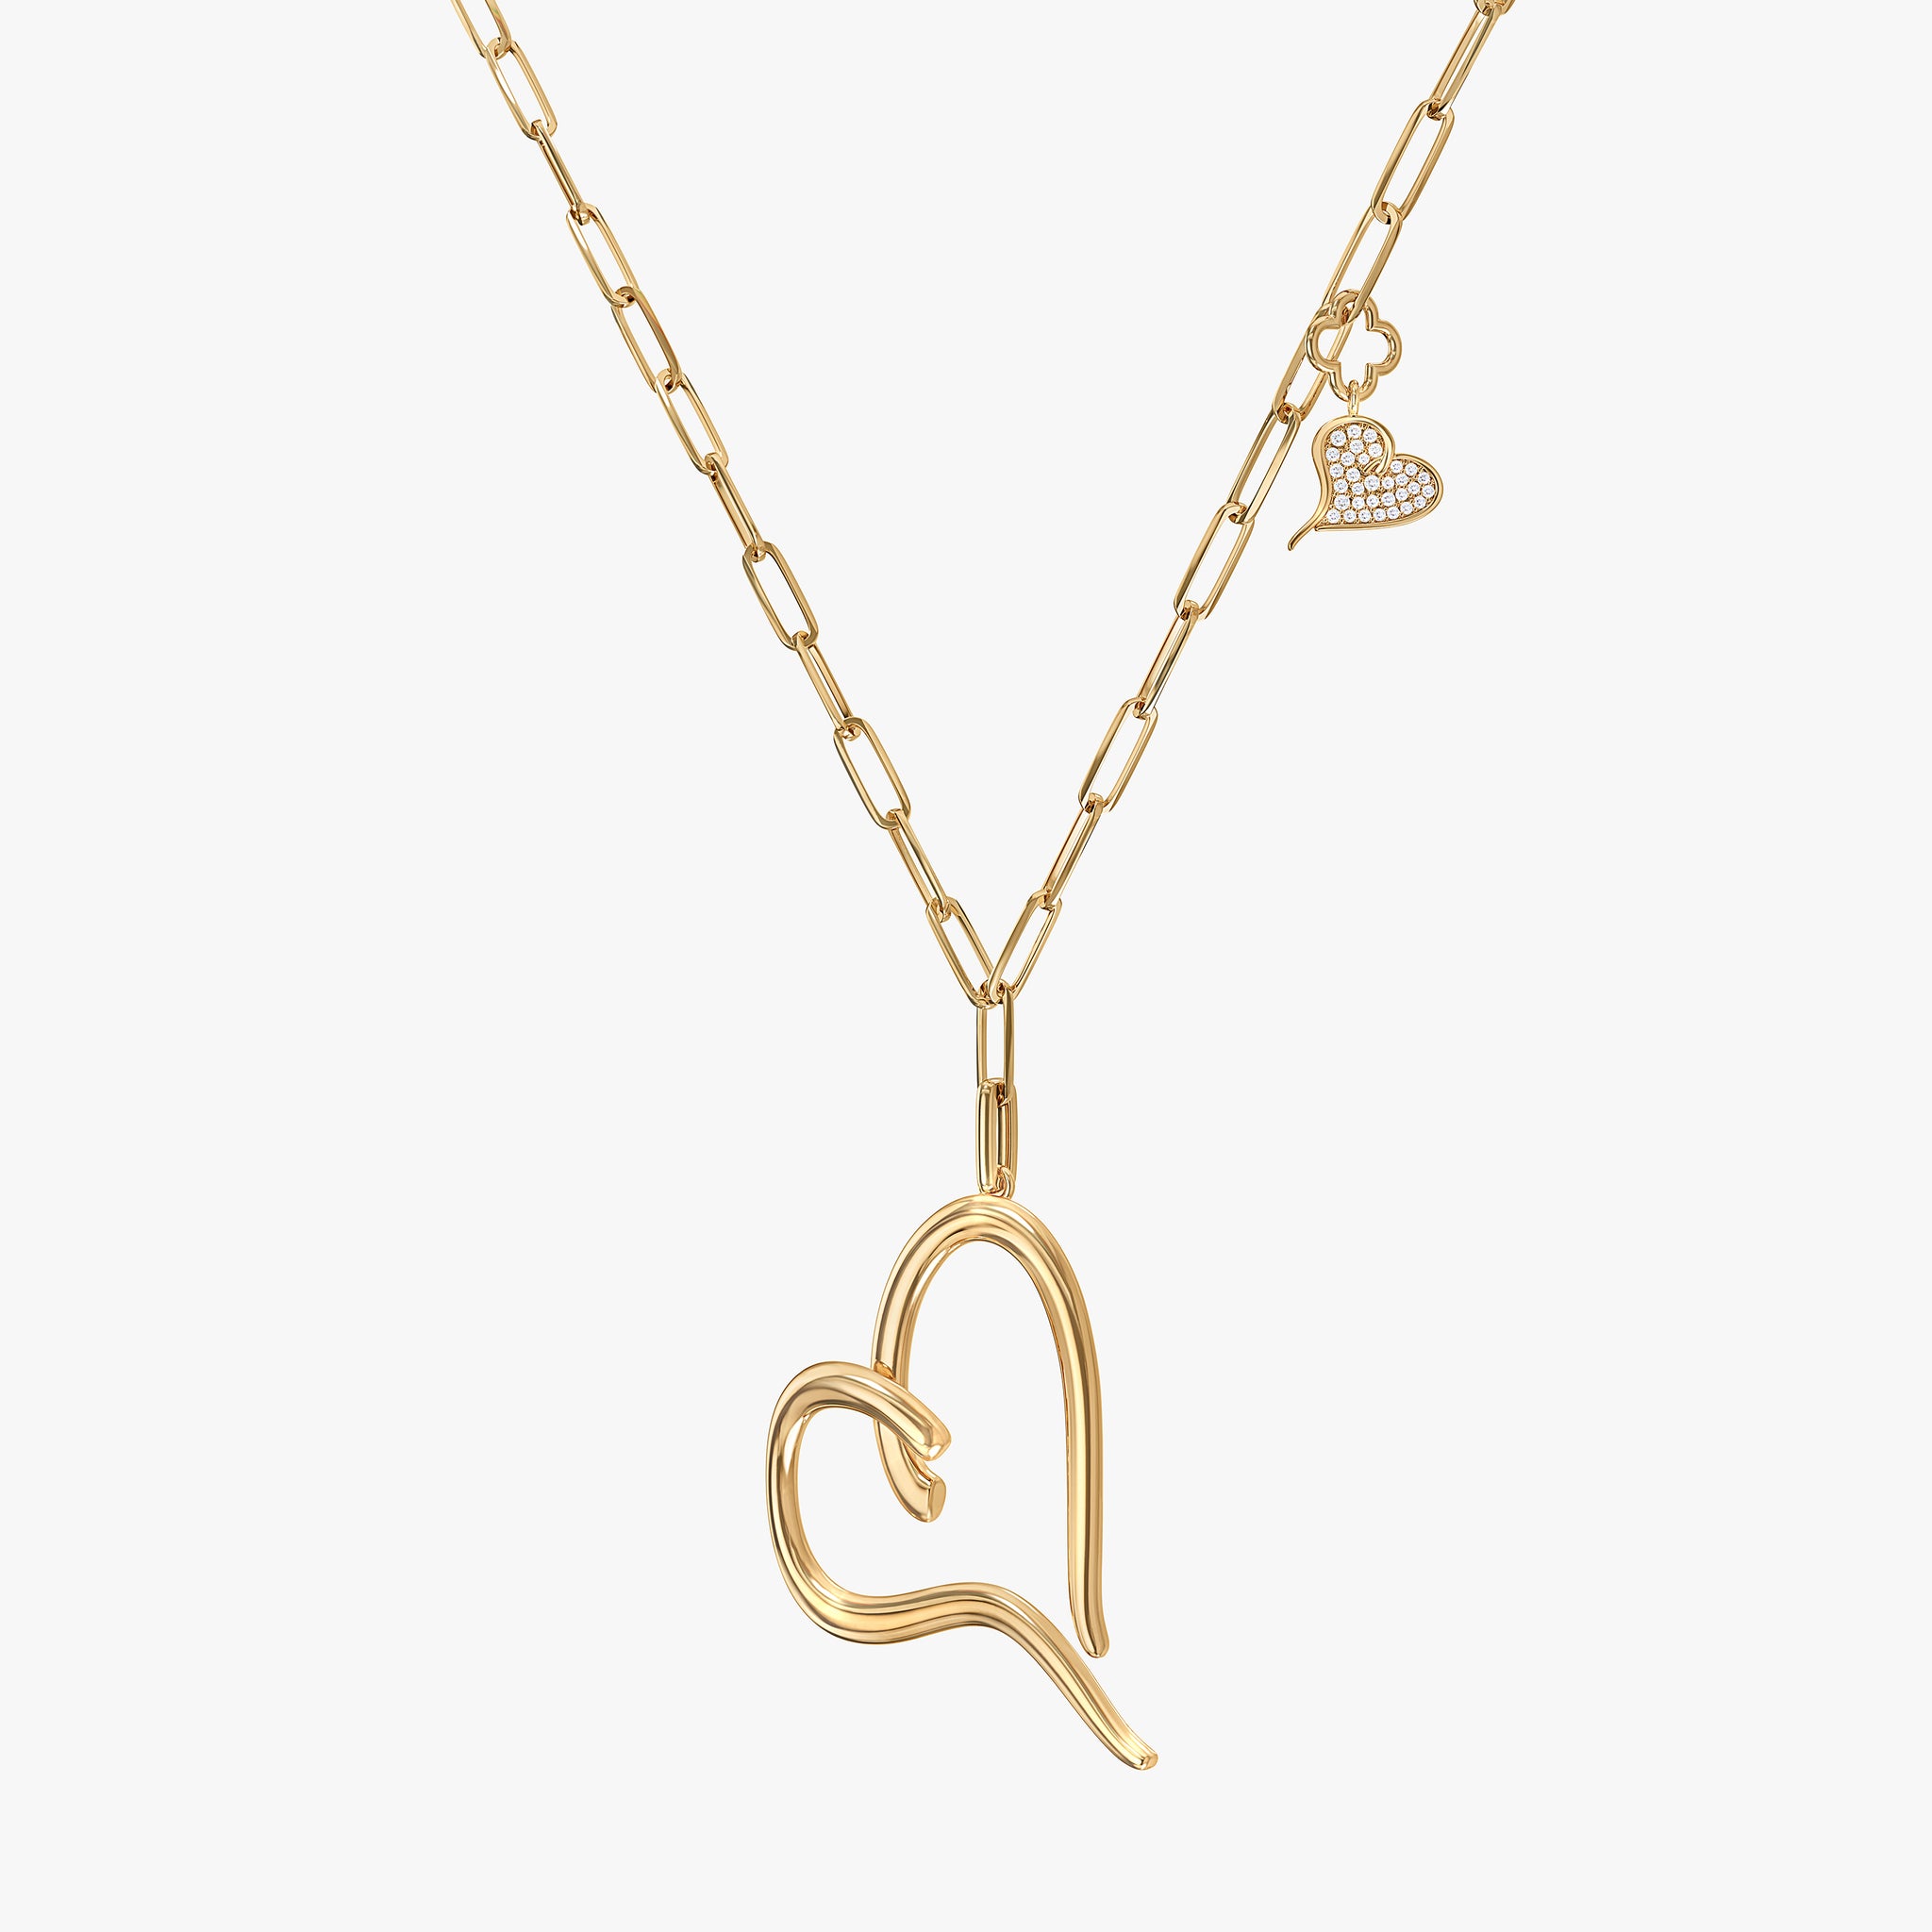 J'EVAR 14KT Yellow Gold Heart Charm ALTR Lab Grown Diamond Necklace Perspective View